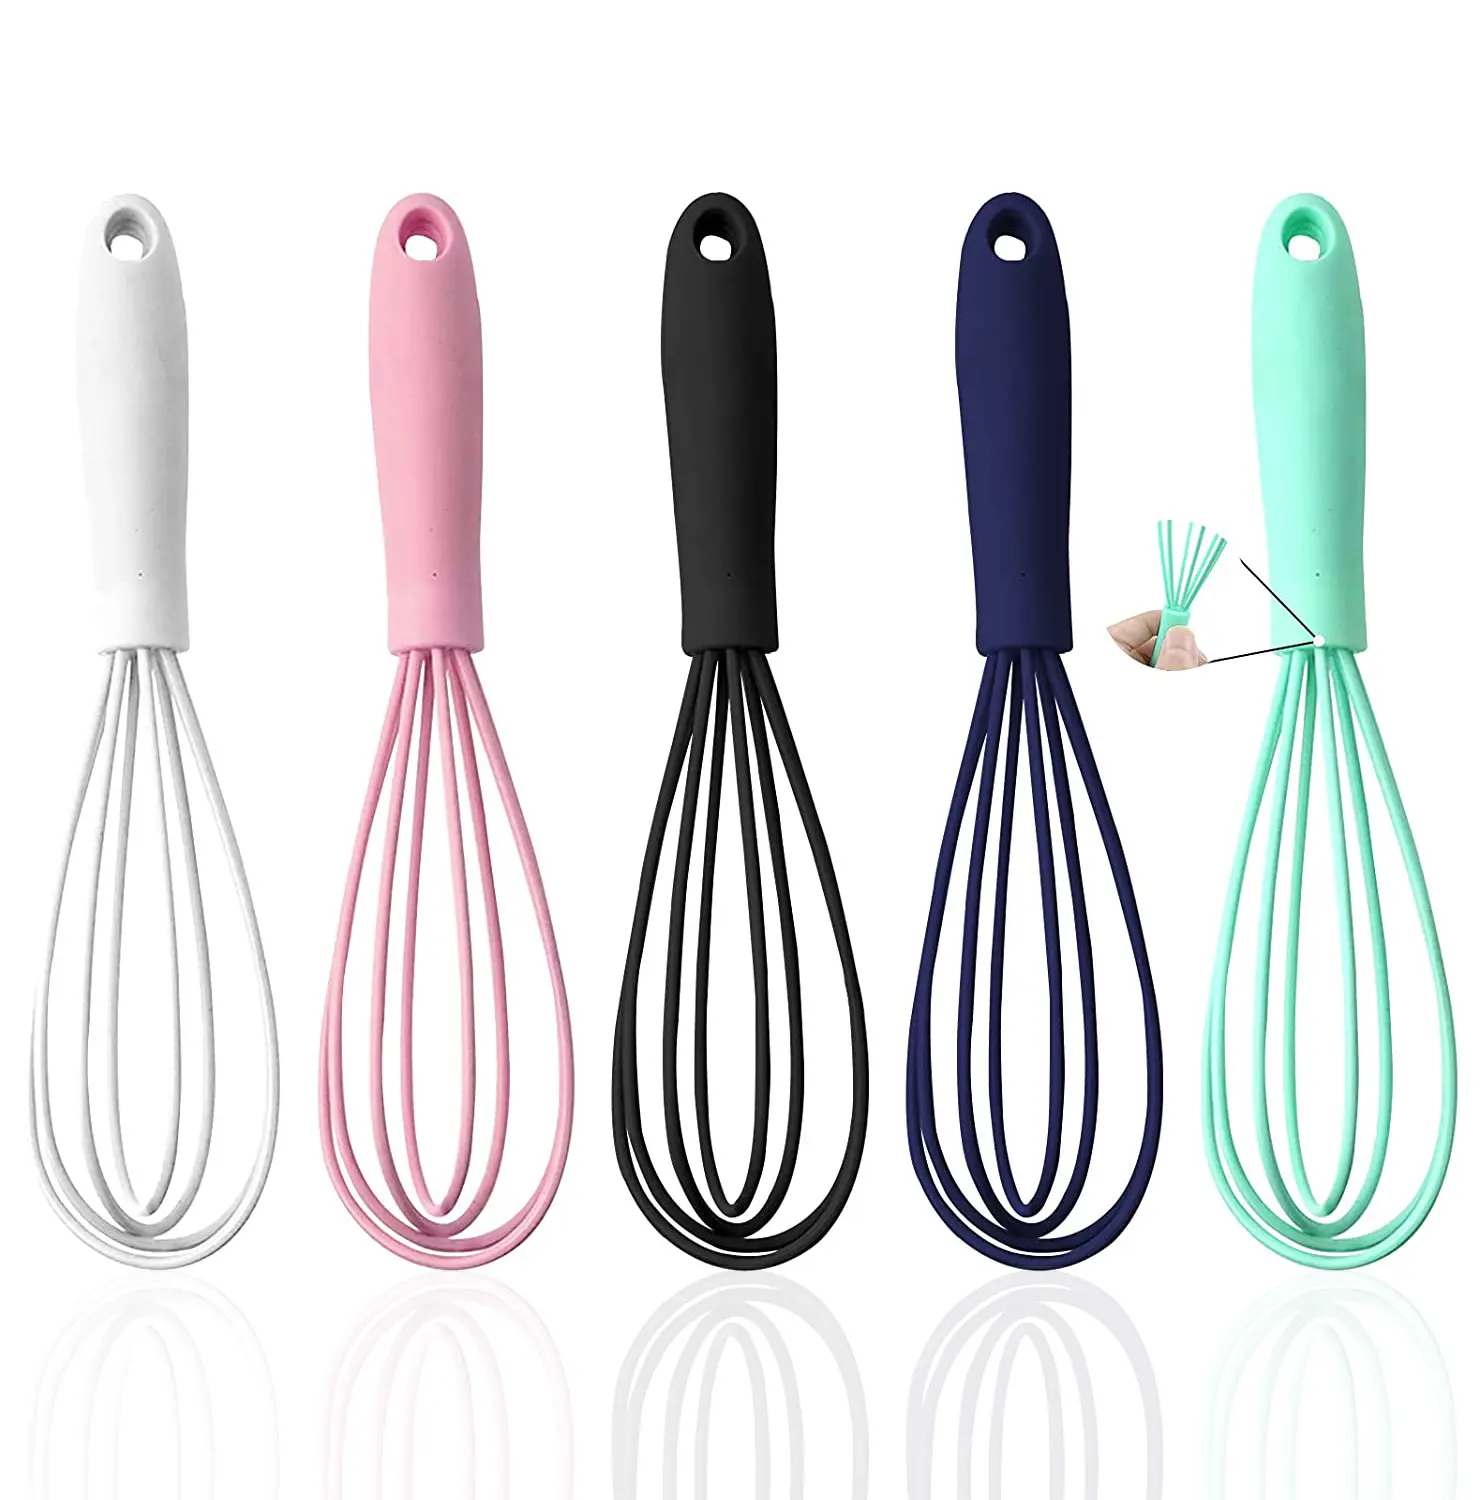 Hot Sale Kitchen Egg Beater Stainless Steel Mini Wire Whisk Colorful Mini Silicone Whisks